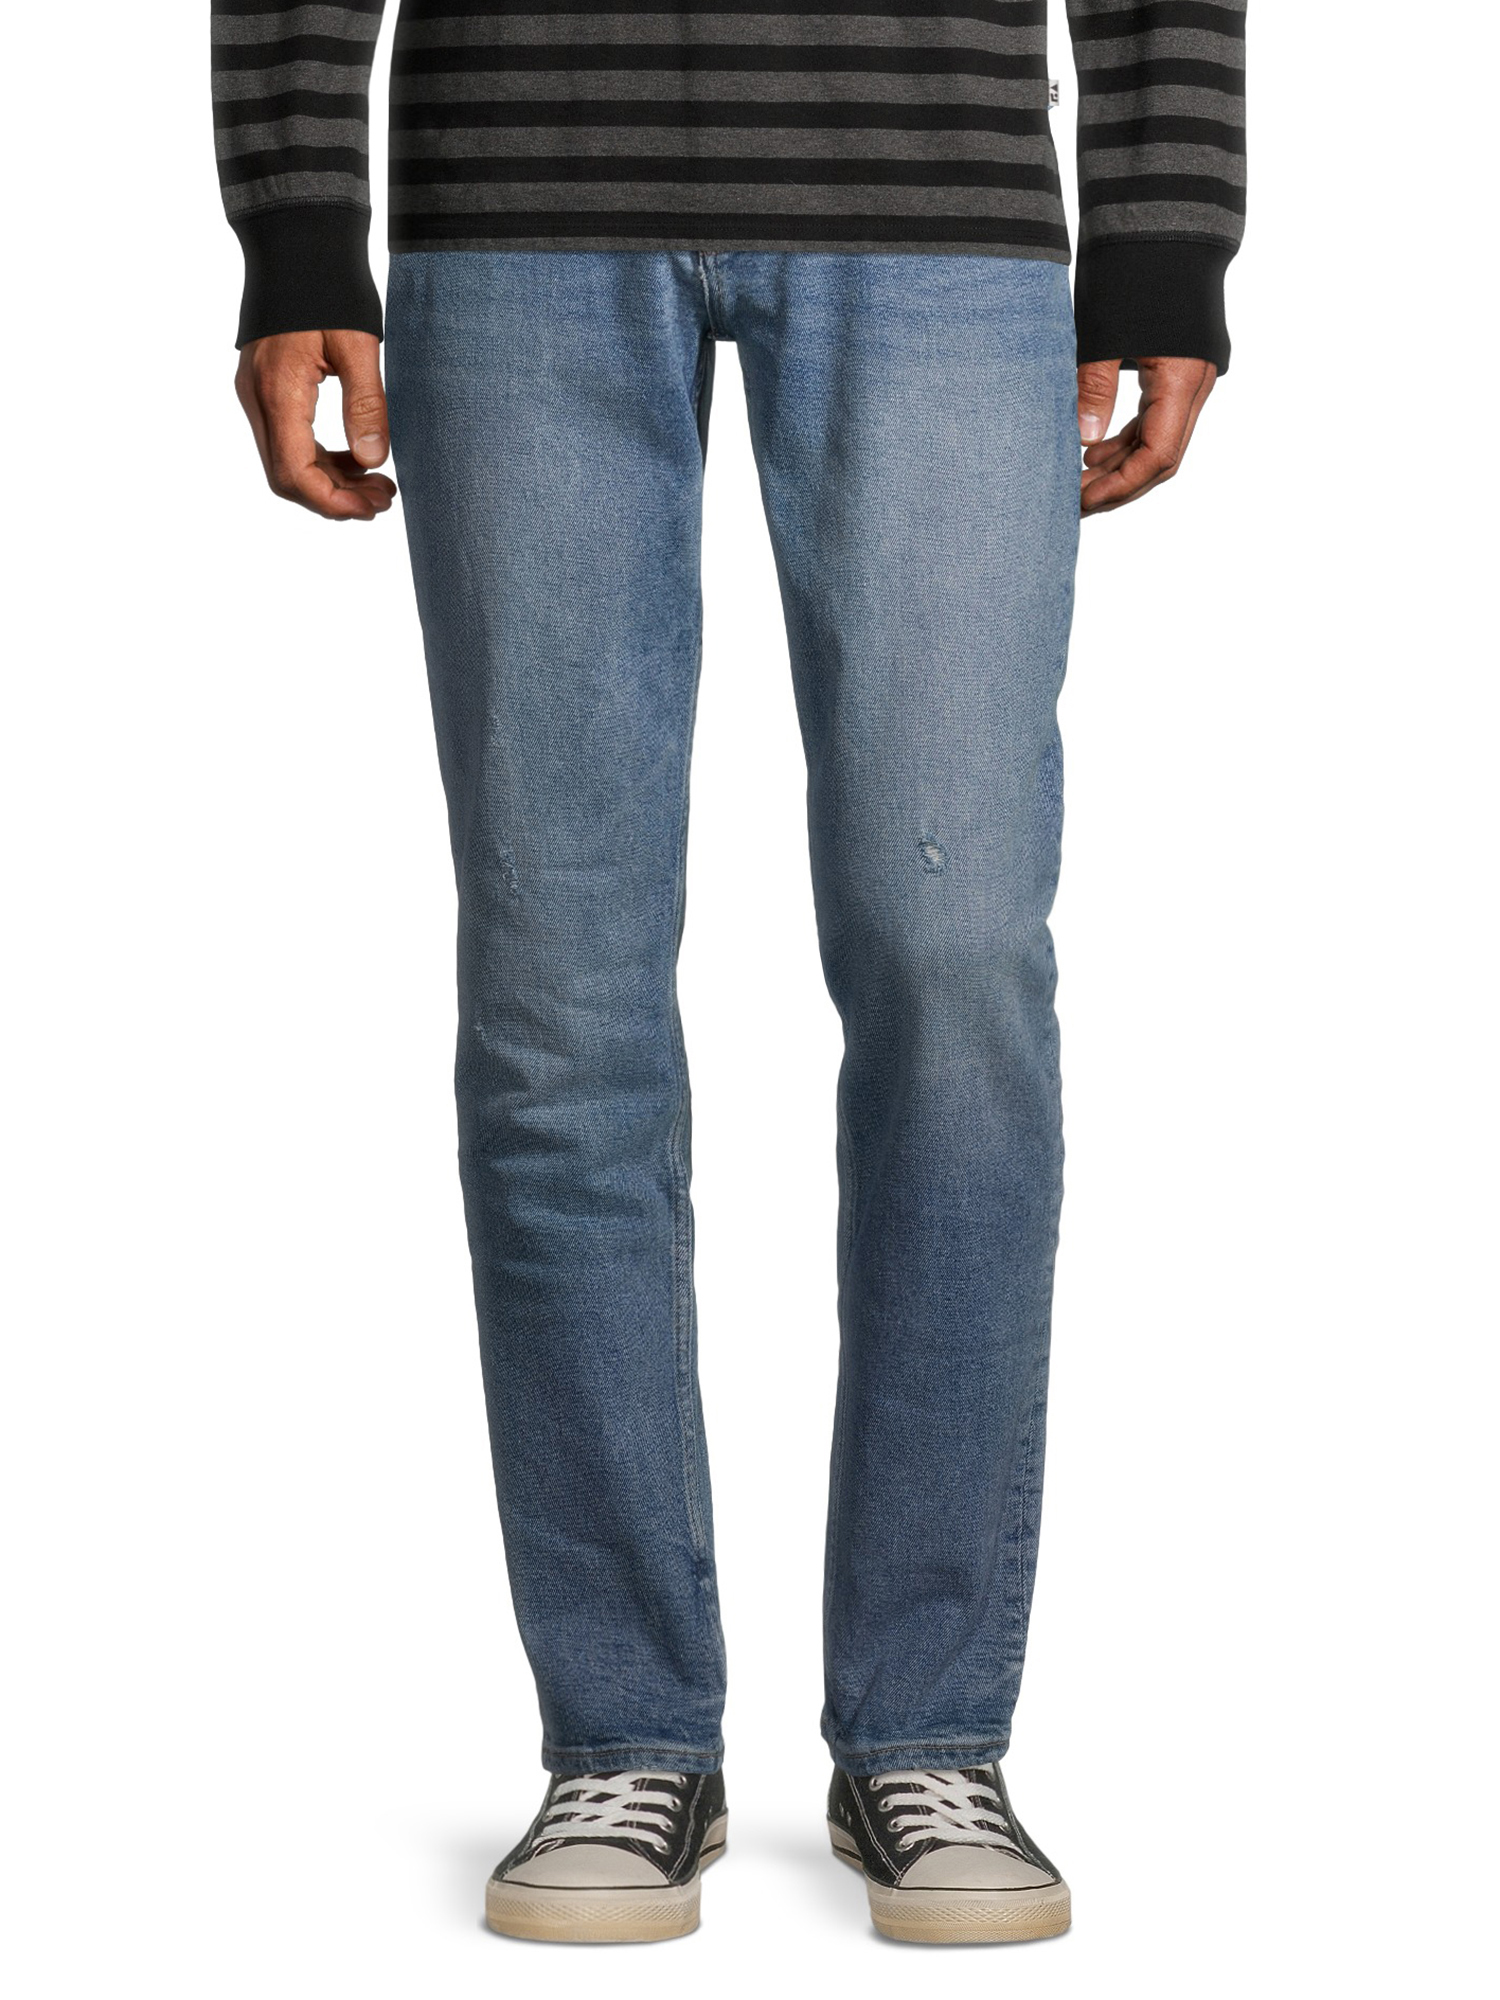 Free Assembly Men's Athletic Fit Jeans - image 1 of 7